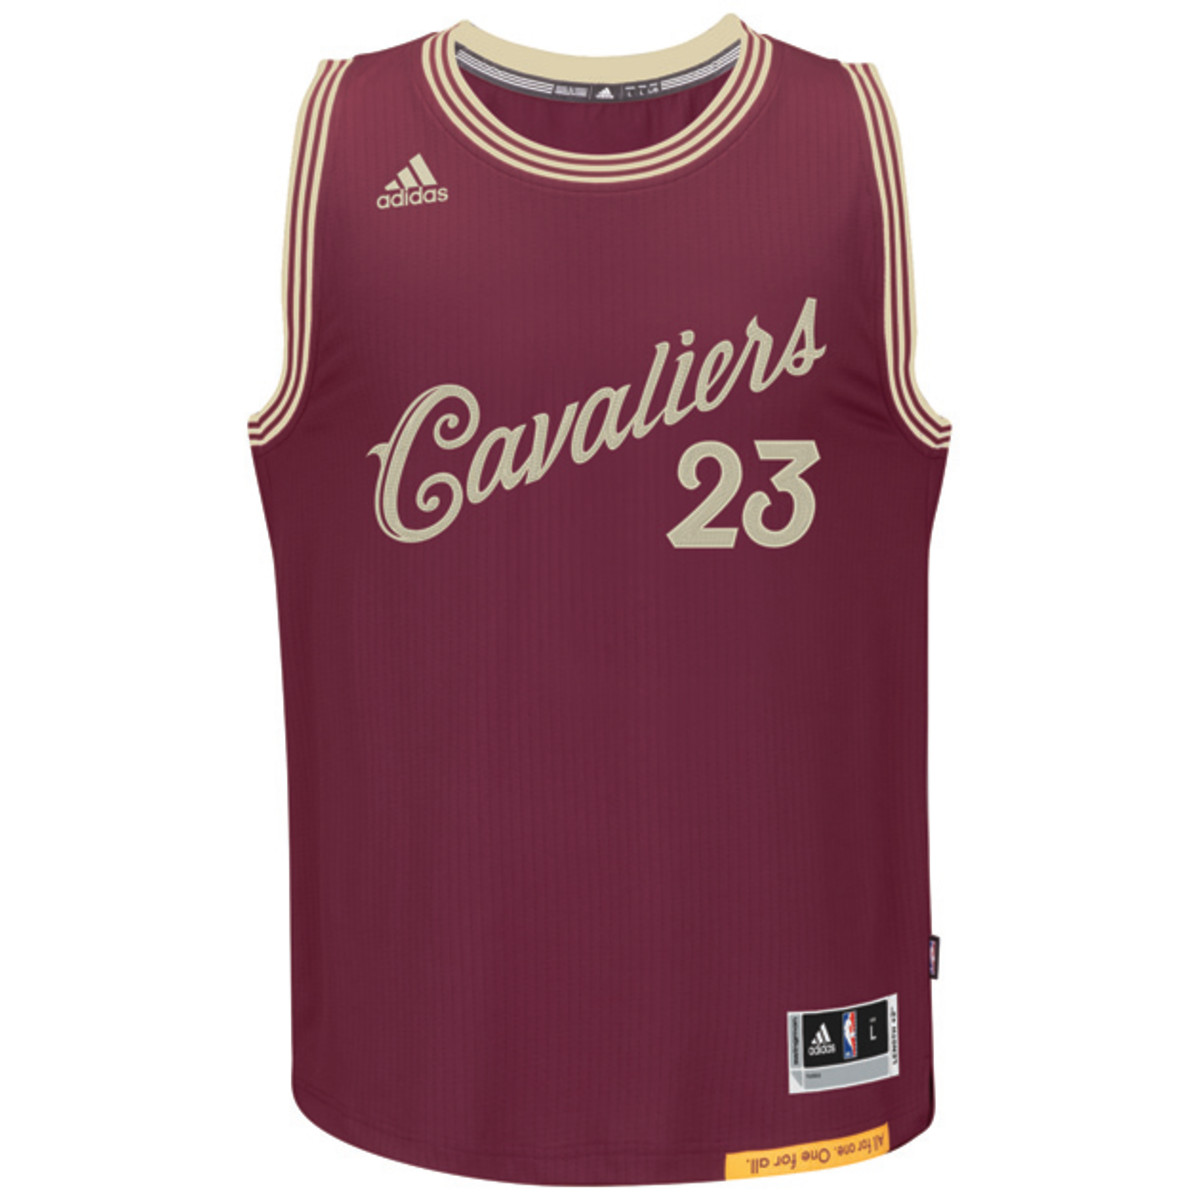 NBA Christmas Day jerseys featured in new commerical Sports Illustrated